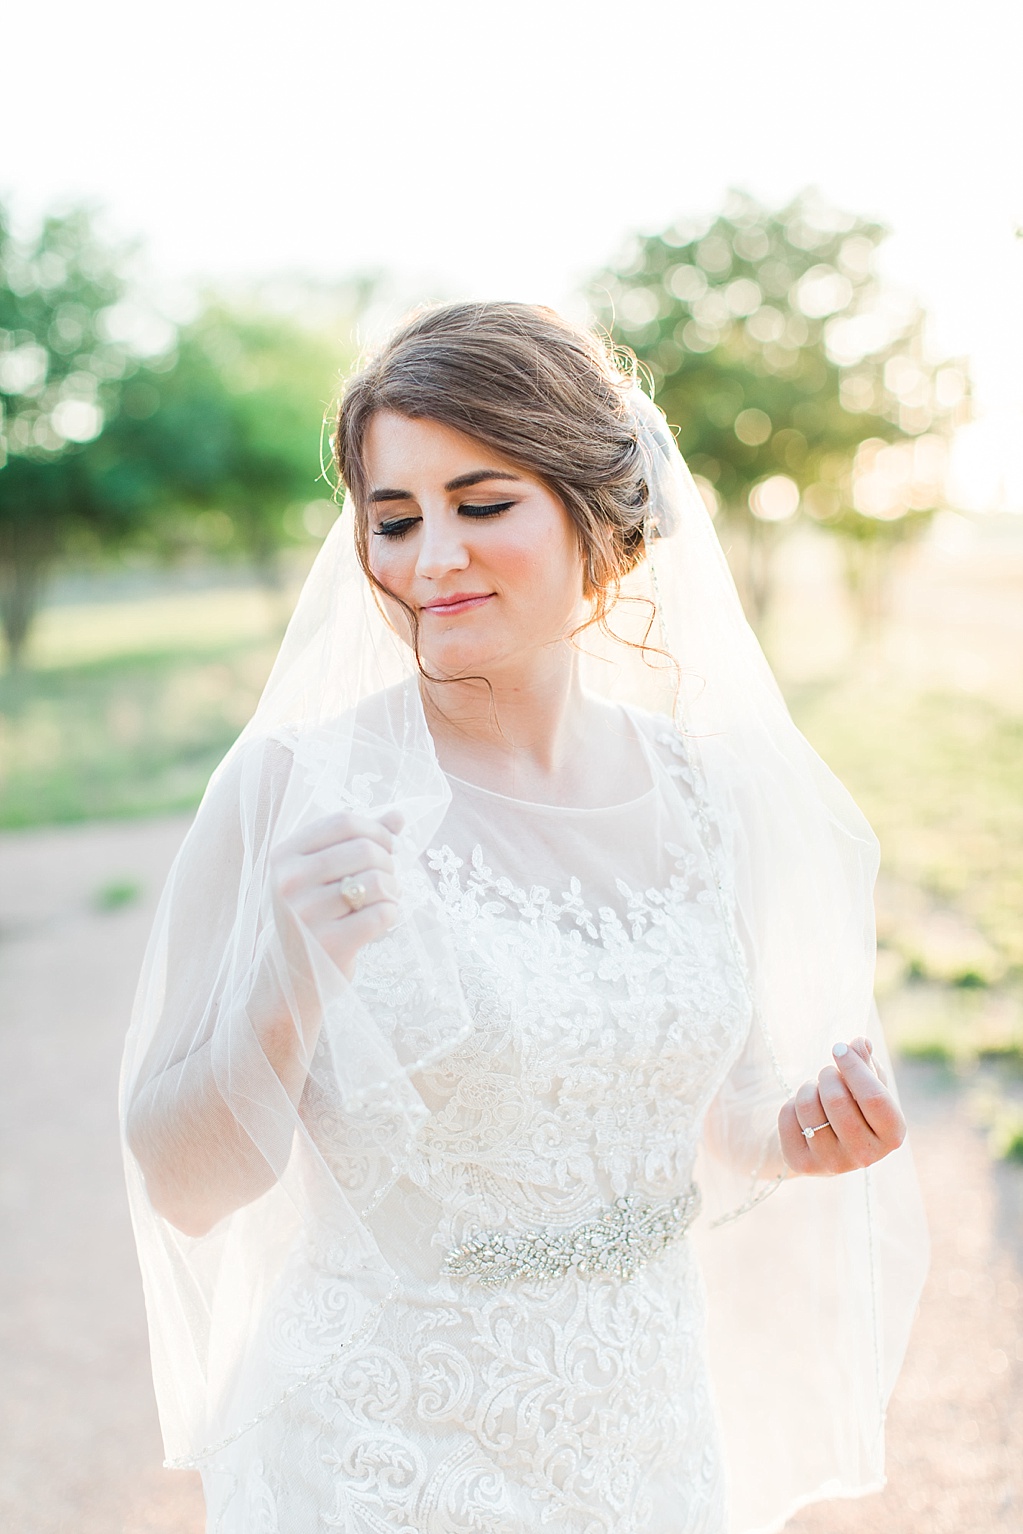 A Spring Bridal Session at The Wildseed Farm in Fredericksburg Texas on Highway 290 by Allison Jeffers Photography 0003